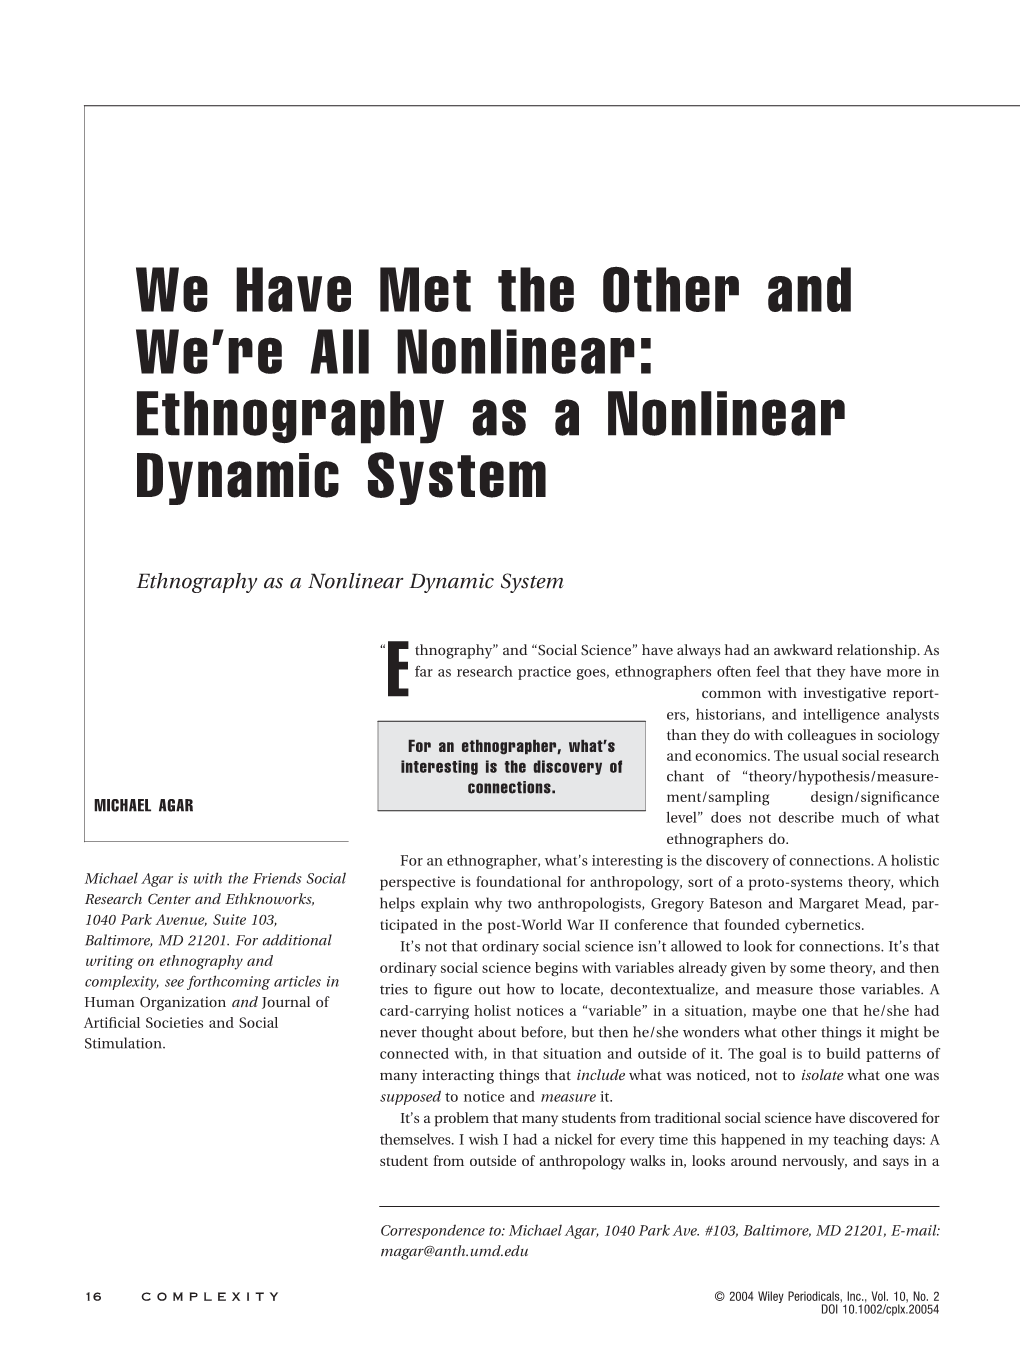 Ethnography As a Nonlinear Dynamic System